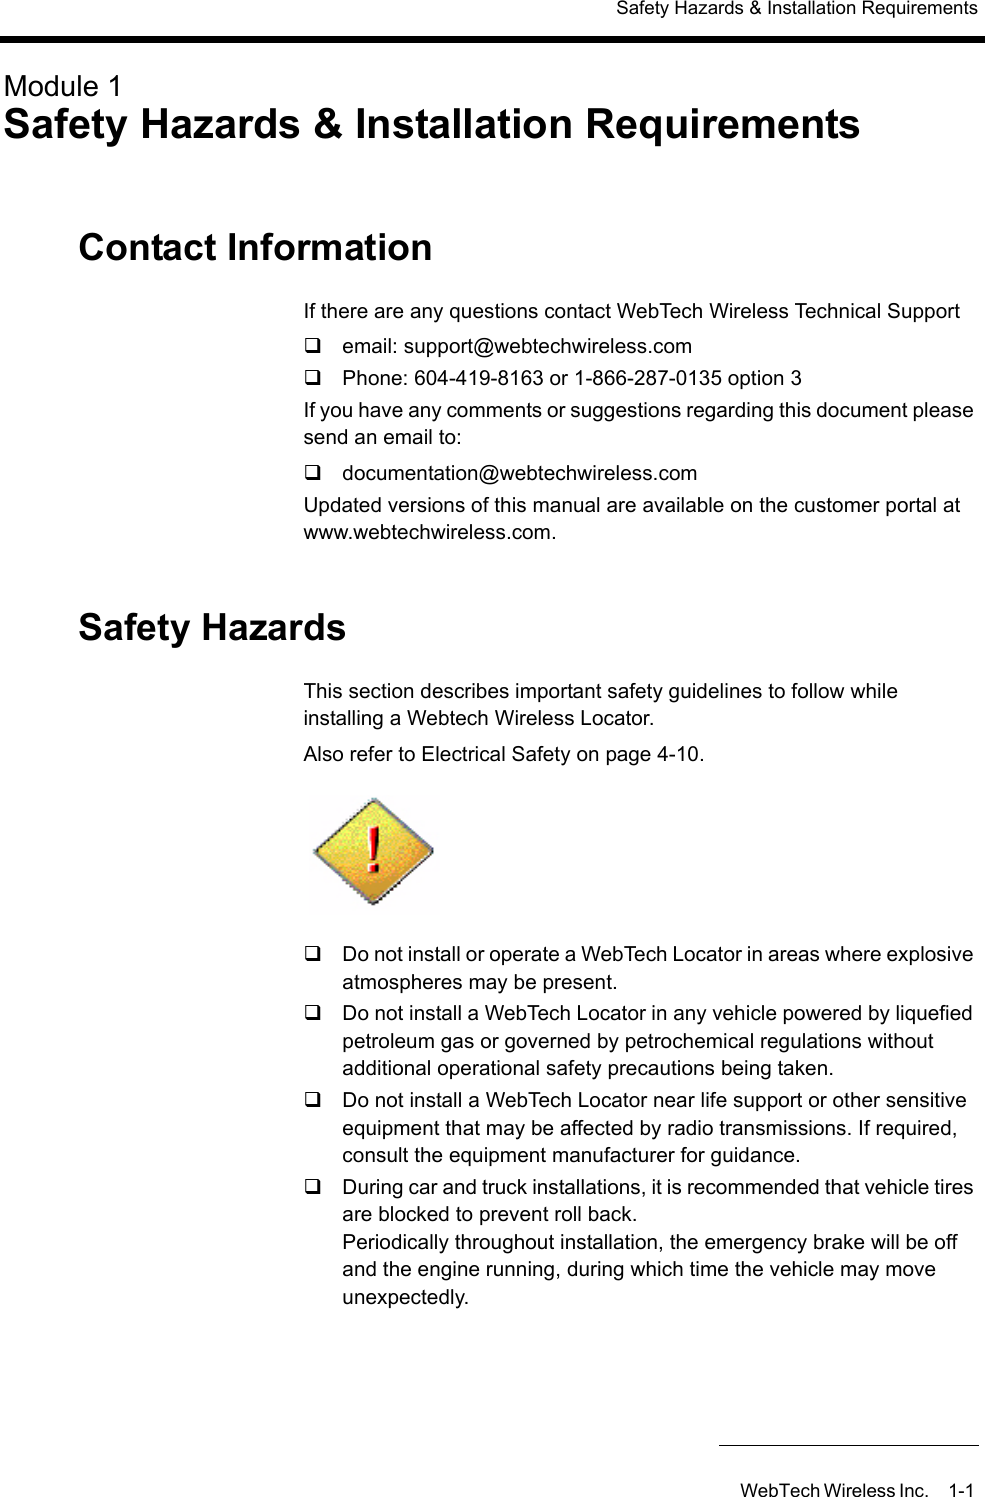 Safety Hazards &amp; Installation RequirementsWebTech Wireless Inc. 1-1 Module 1Safety Hazards &amp; Installation RequirementsContact InformationIf there are any questions contact WebTech Wireless Technical Support email: support@webtechwireless.com Phone: 604-419-8163 or 1-866-287-0135 option 3If you have any comments or suggestions regarding this document please send an email to:documentation@webtechwireless.comUpdated versions of this manual are available on the customer portal at www.webtechwireless.com. Safety HazardsThis section describes important safety guidelines to follow while installing a Webtech Wireless Locator.Also refer to Electrical Safety on page 4-10.Do not install or operate a WebTech Locator in areas where explosive atmospheres may be present.Do not install a WebTech Locator in any vehicle powered by liquefied petroleum gas or governed by petrochemical regulations without additional operational safety precautions being taken.Do not install a WebTech Locator near life support or other sensitive equipment that may be affected by radio transmissions. If required, consult the equipment manufacturer for guidance.During car and truck installations, it is recommended that vehicle tires are blocked to prevent roll back.Periodically throughout installation, the emergency brake will be off and the engine running, during which time the vehicle may move unexpectedly.